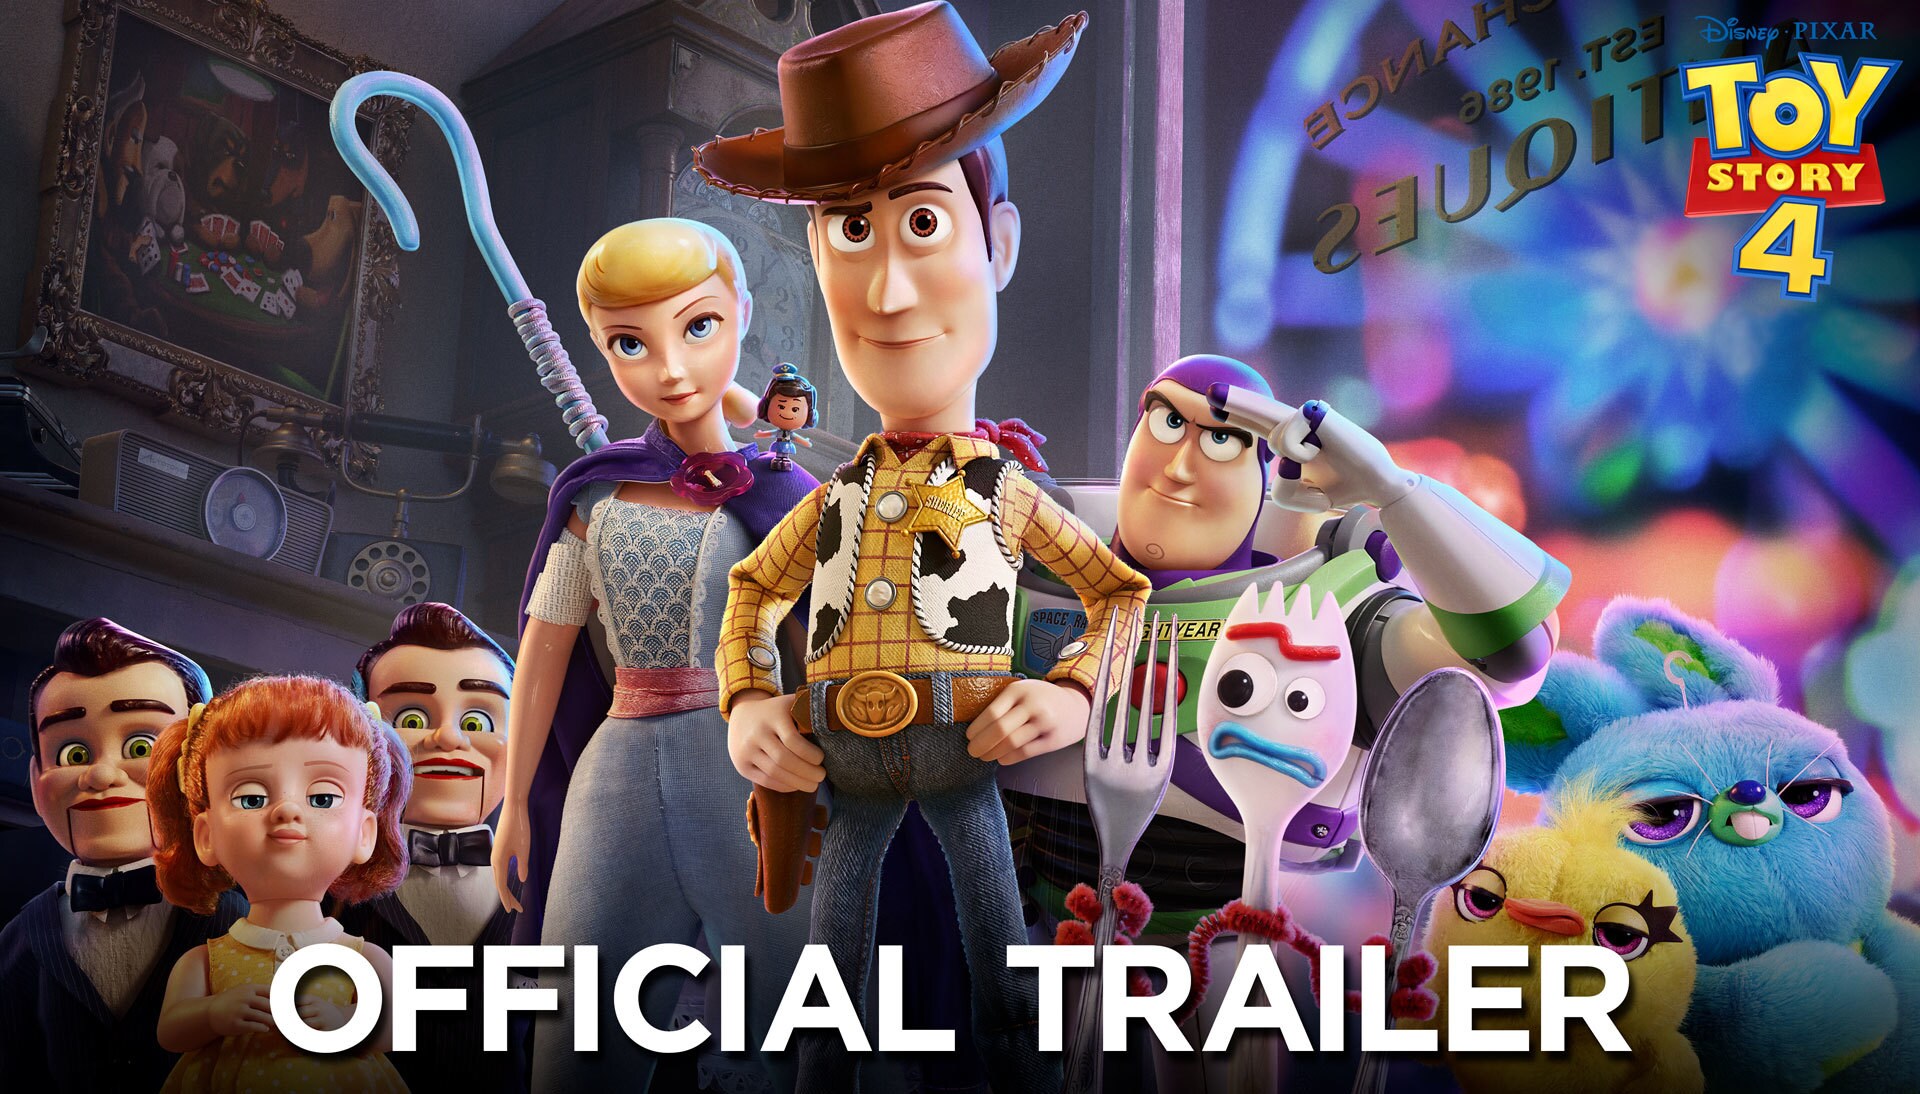 Toy Story 4 - Official Trailer